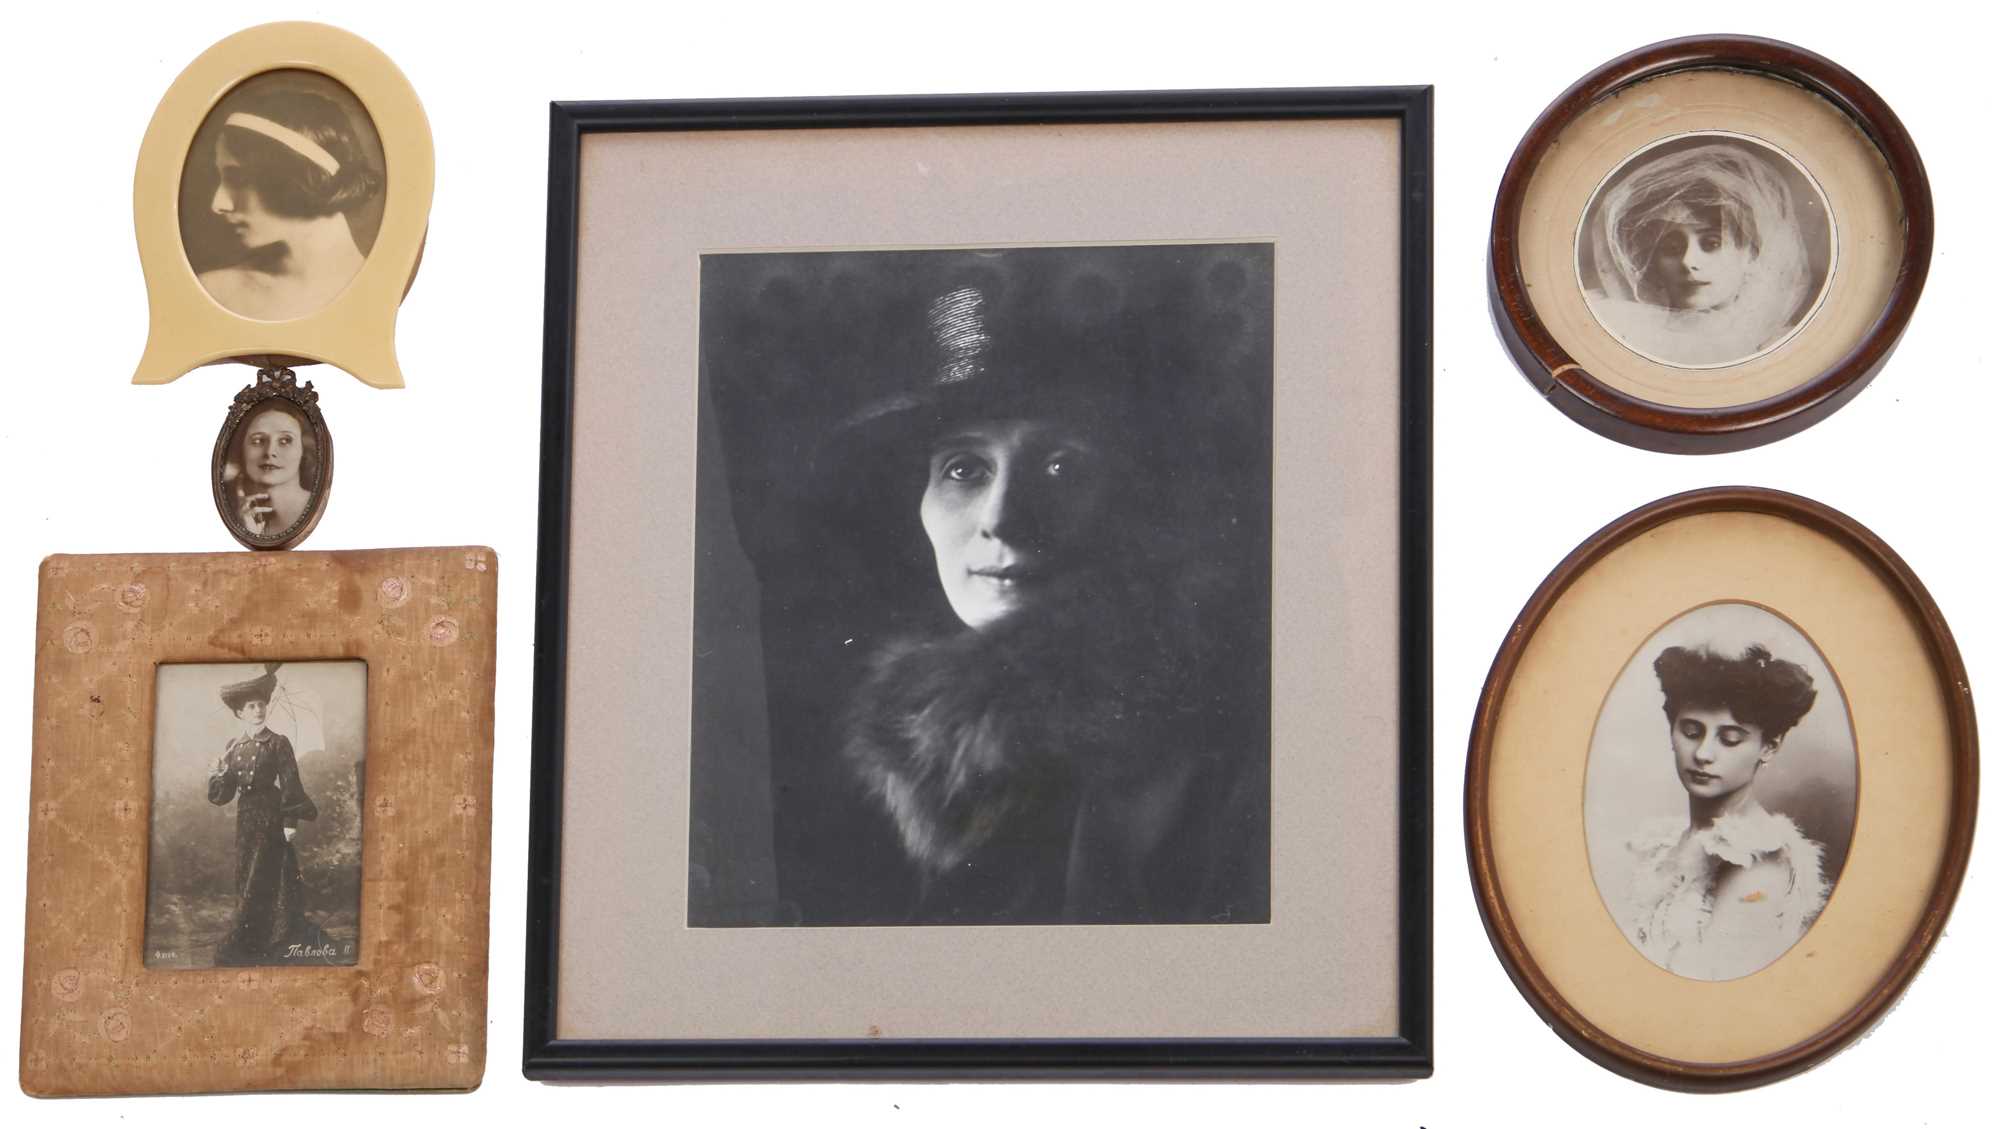 Lot 332 - A group of vintage photographs, mainly portraits or relating to Pavlova's fashion sense, various dates